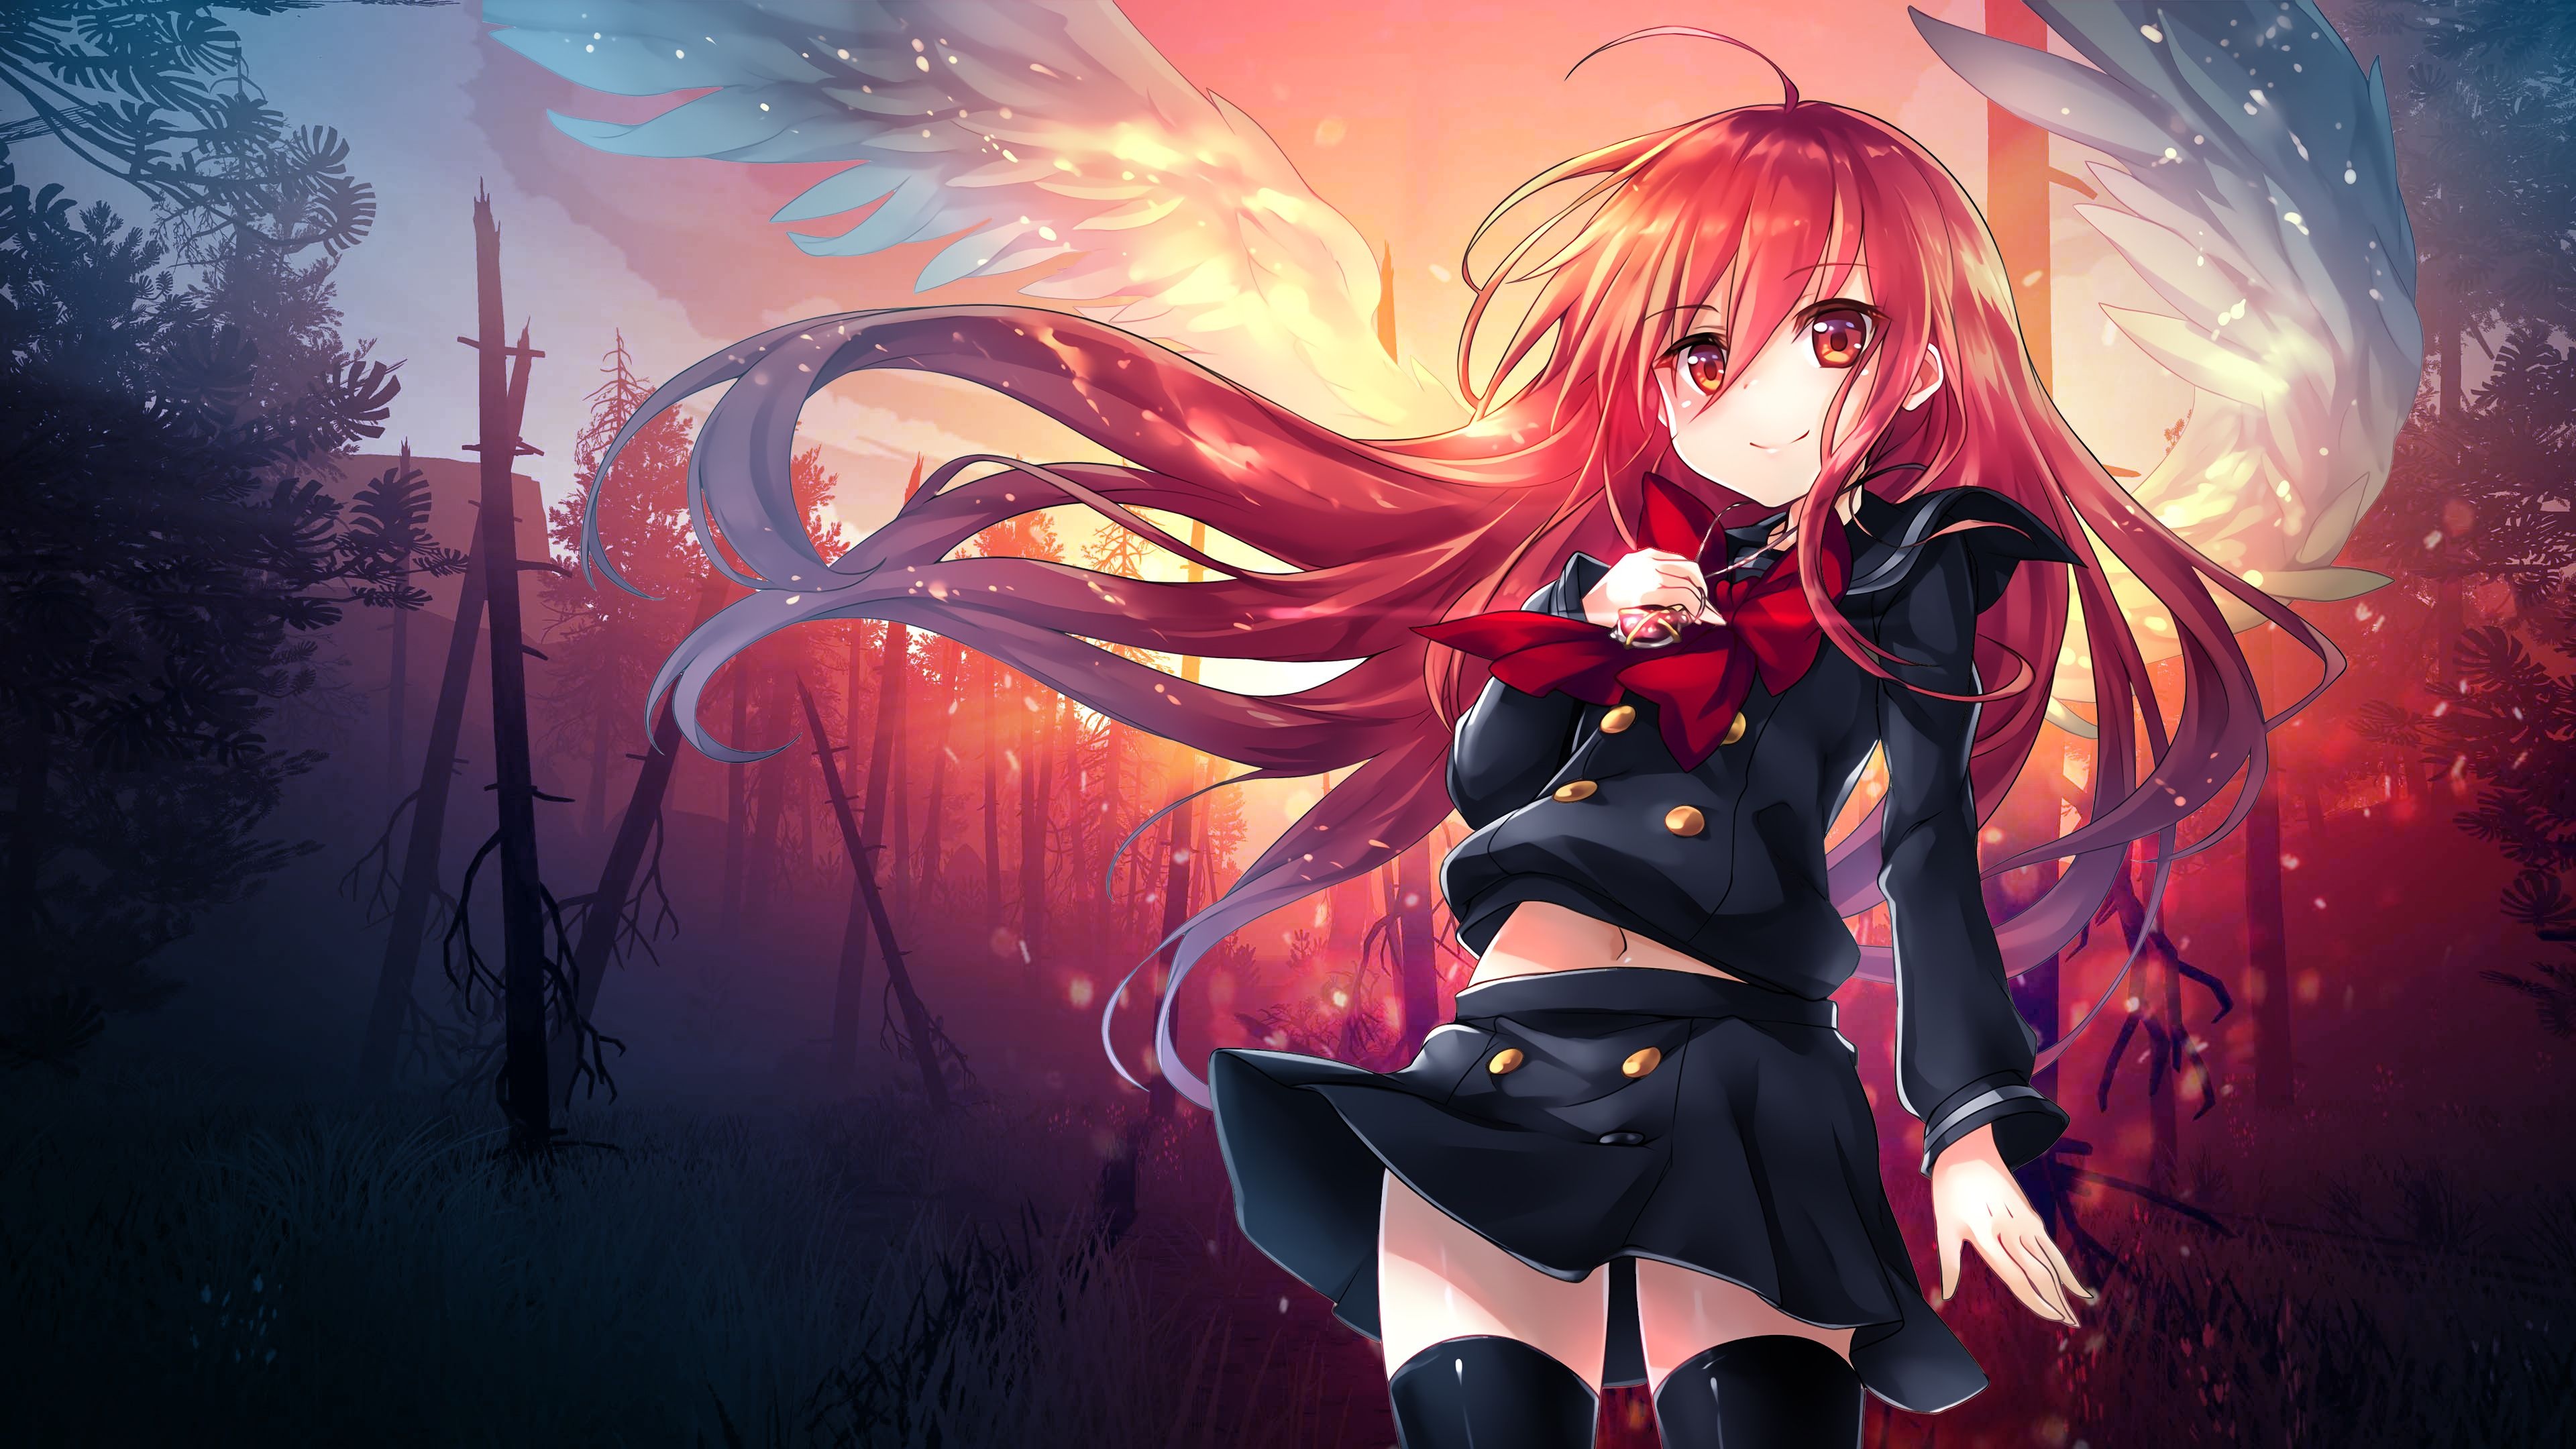 1920x1080 Anime Night Sky Wallpapers - Wallpaper Cave